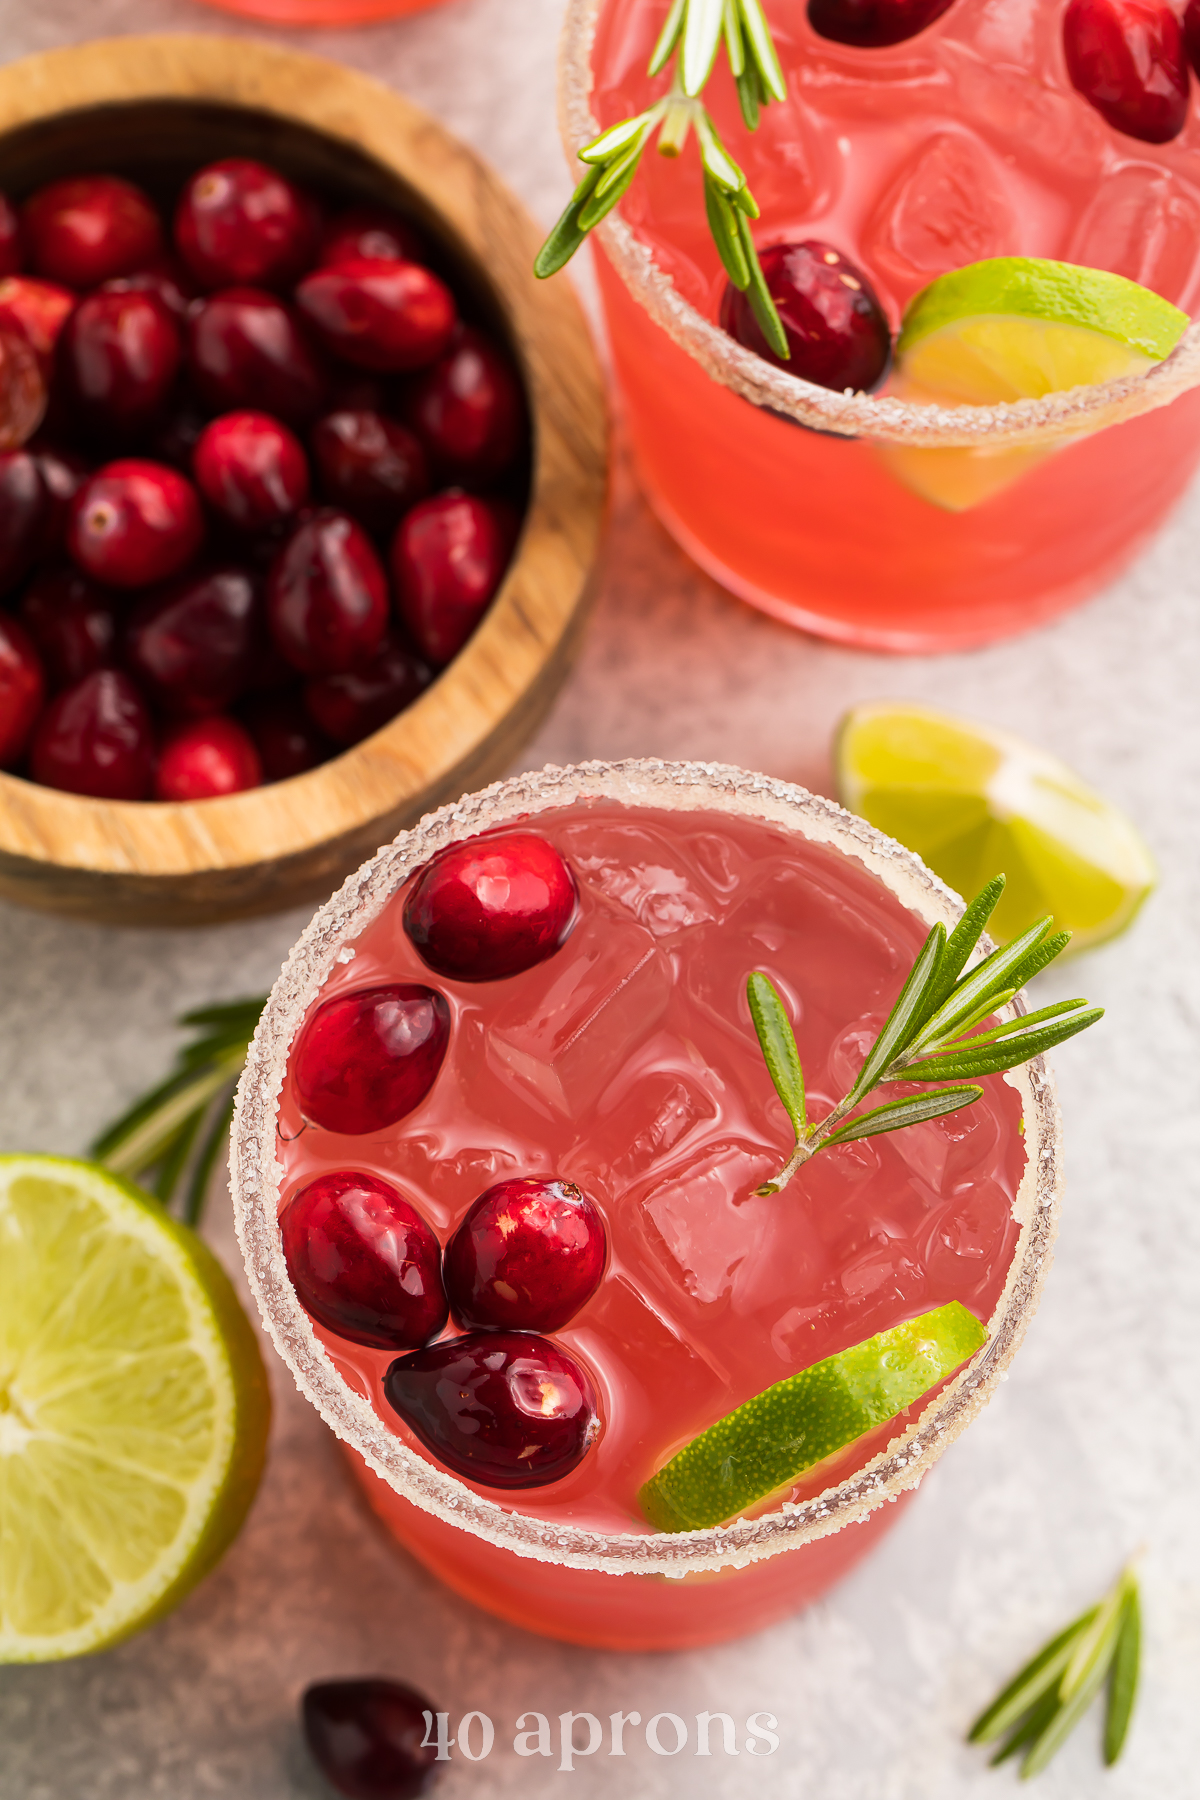 Overhead view of cranberry margaritas on a table. Drinks are bright red and garnished with green rosemary and limes.